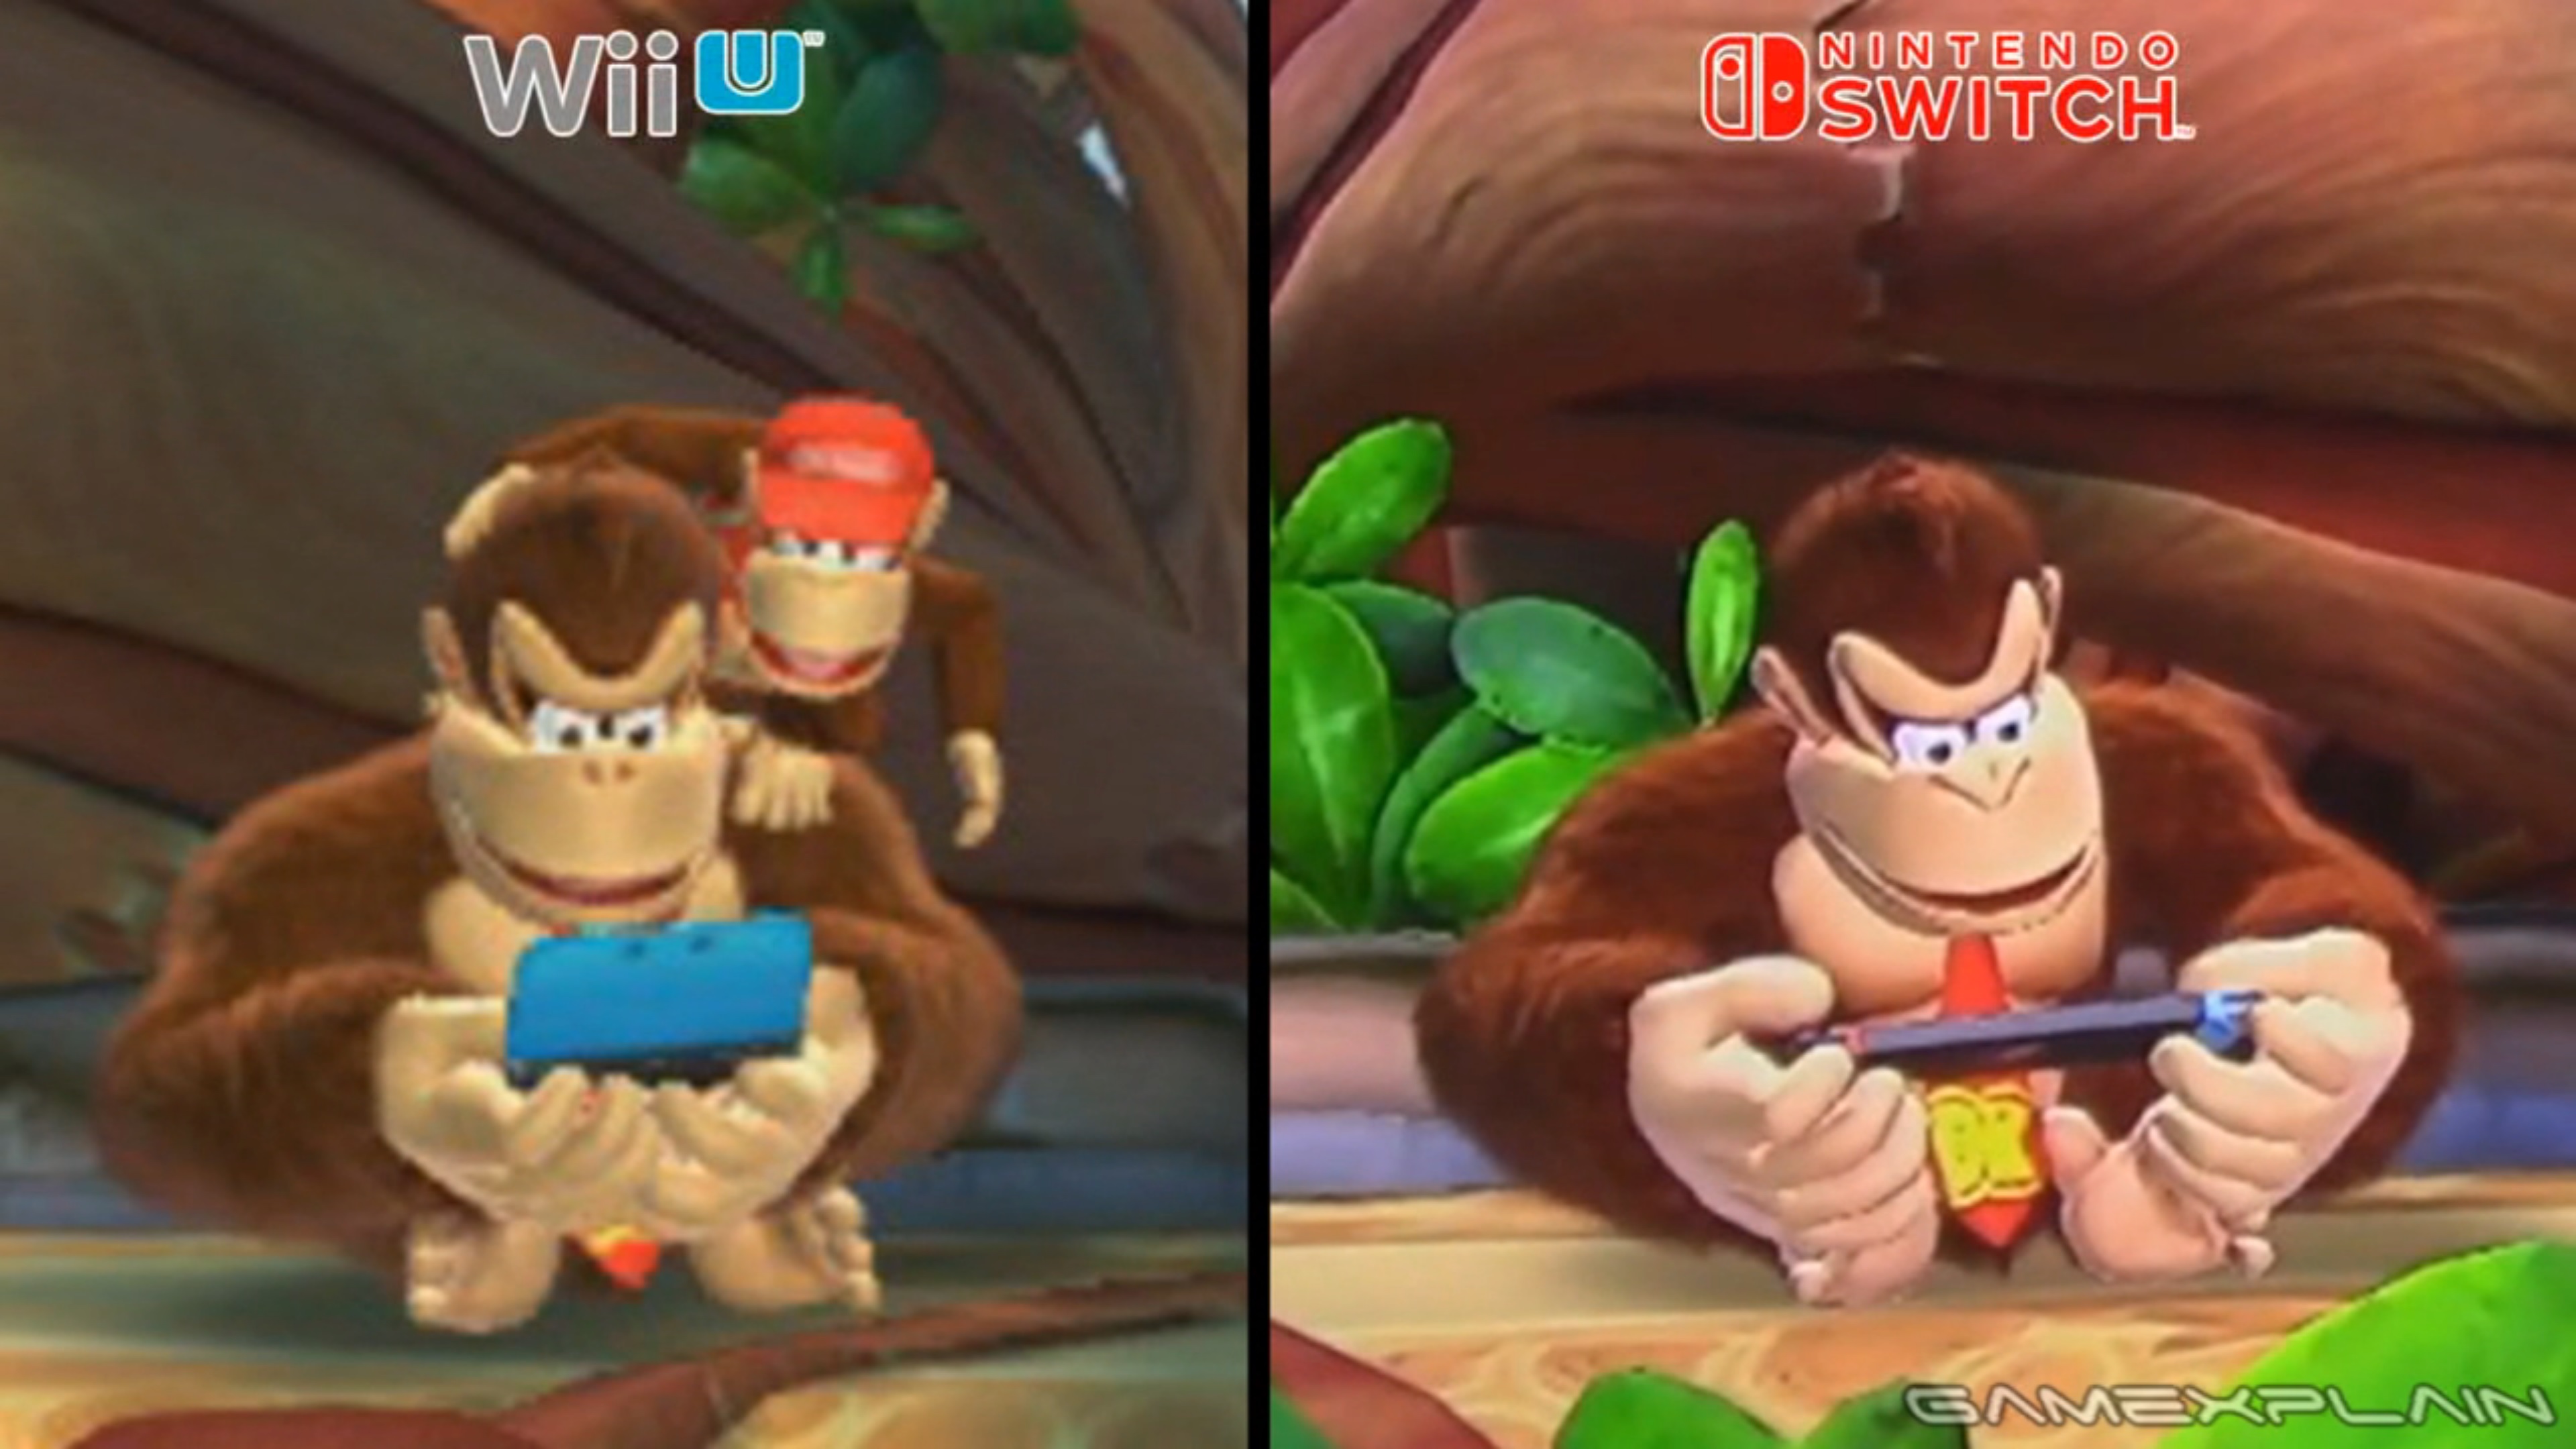 DK has a slightly updated model in the Switch version of Donkey